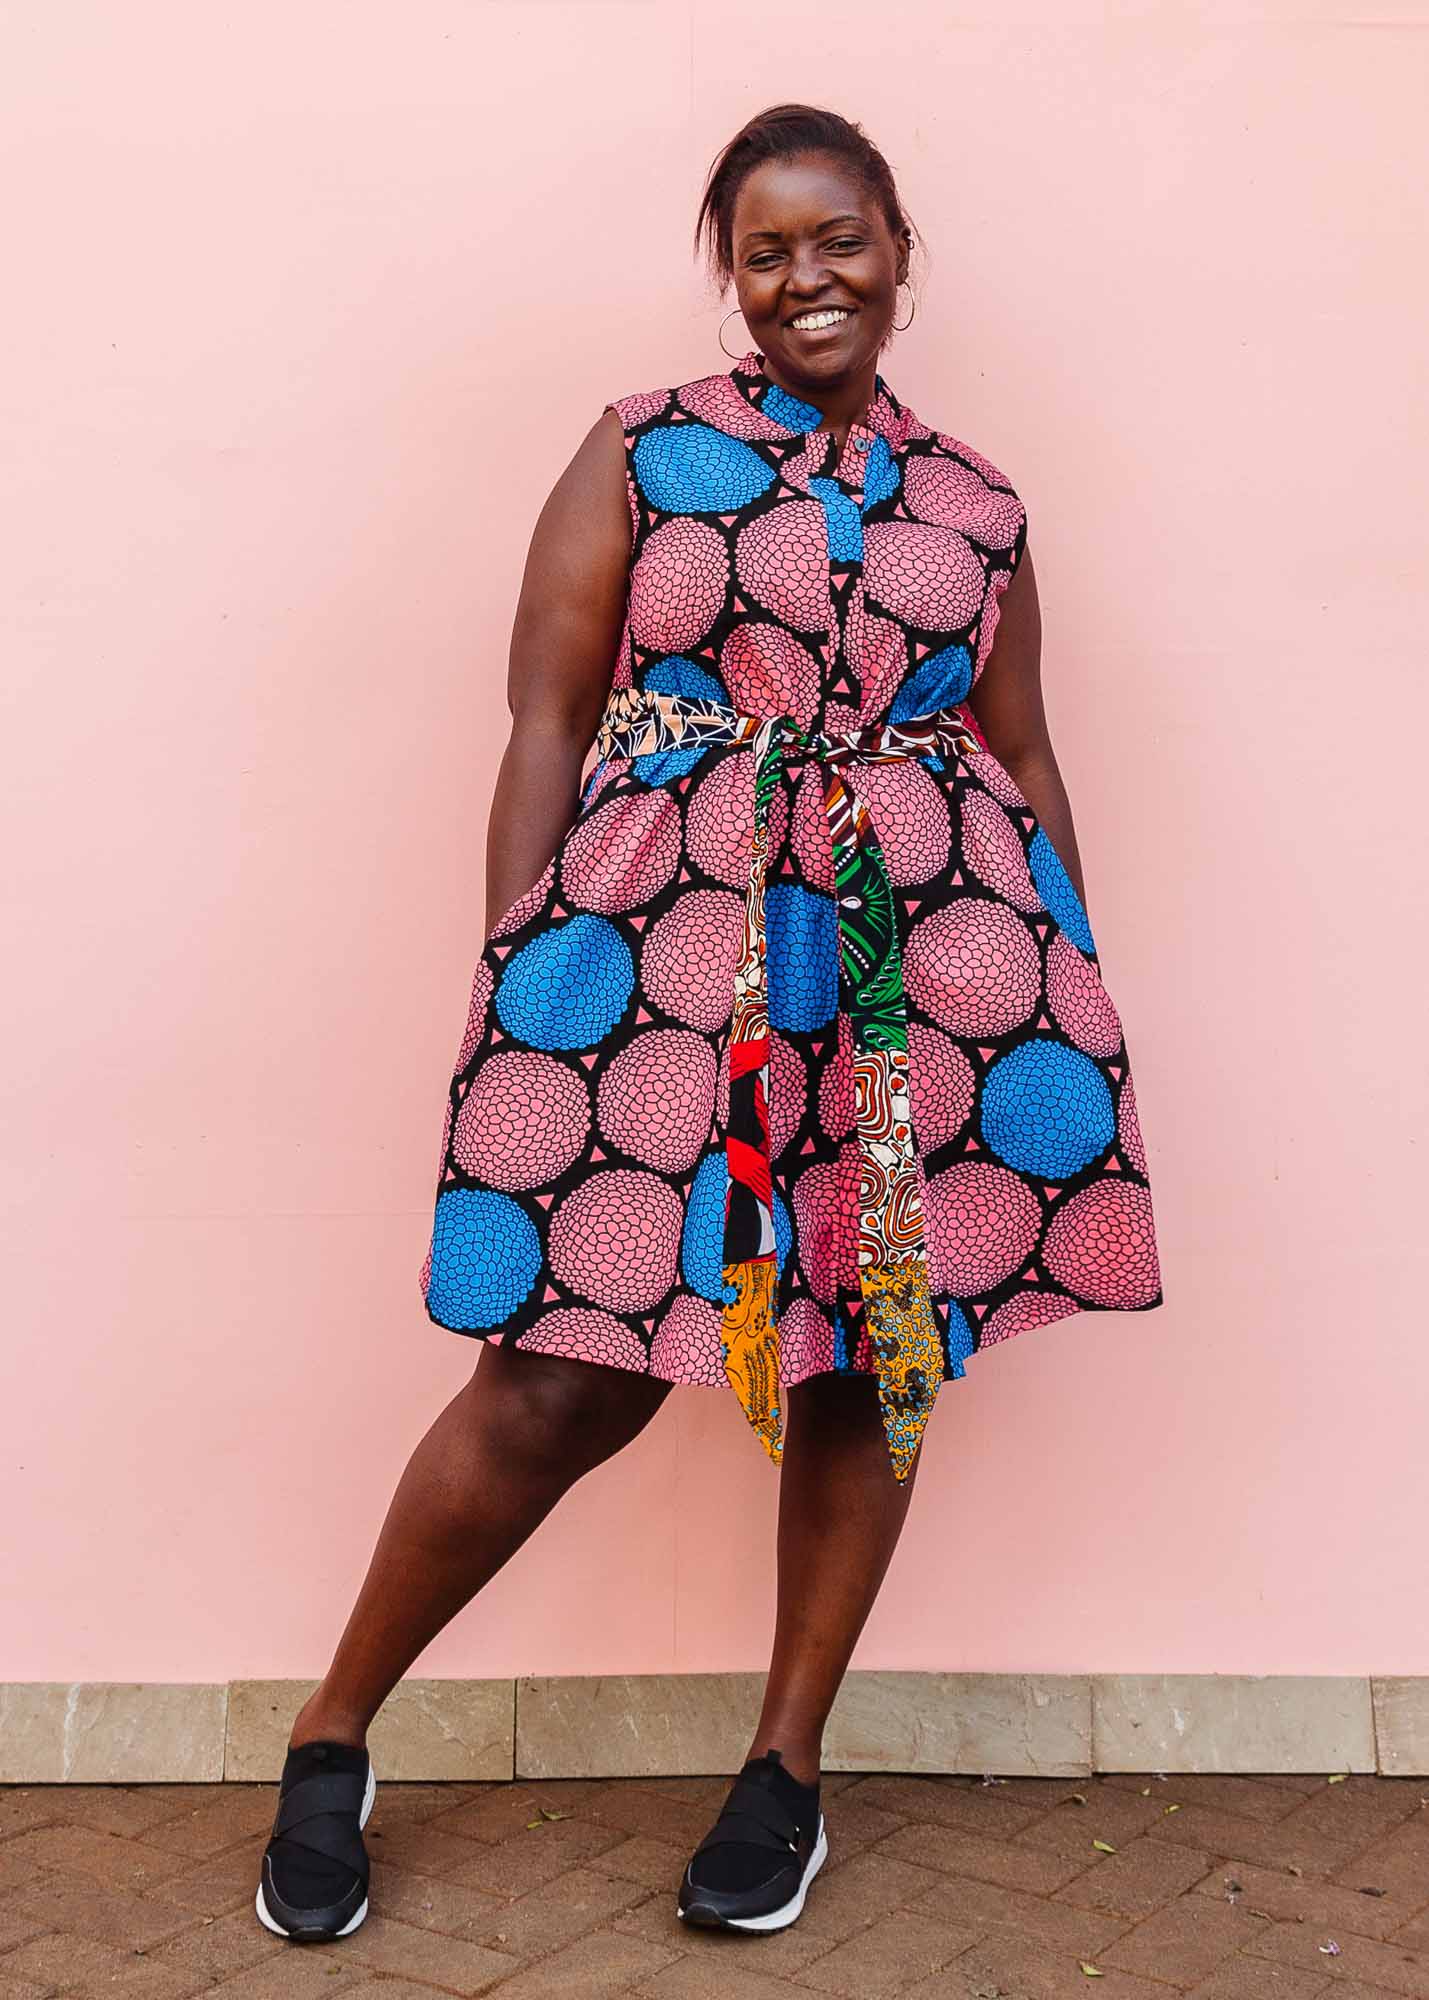 The model is wearing coral, blue and black circular print dress